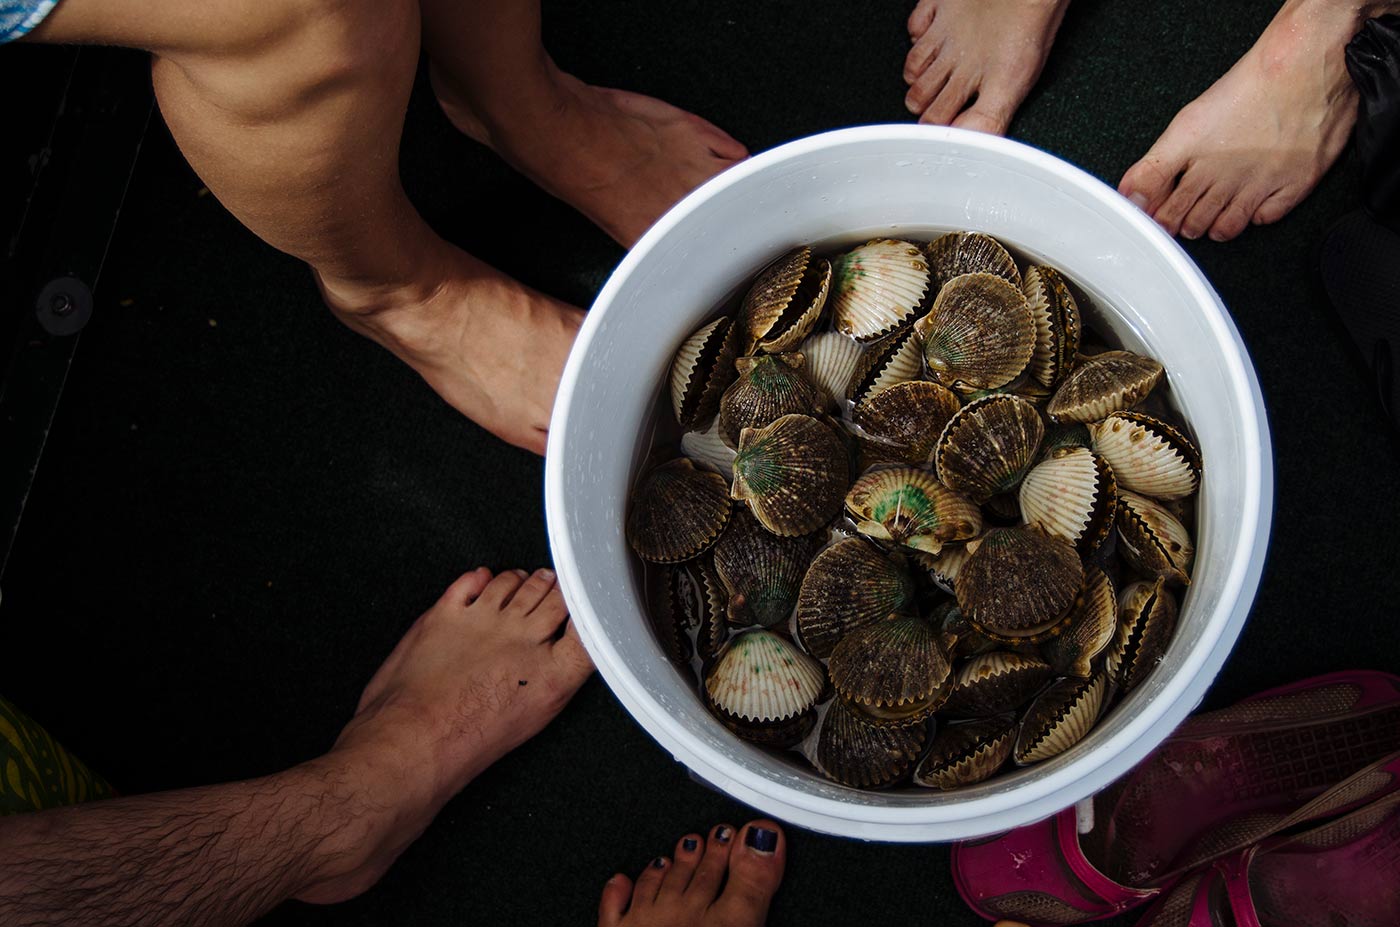 A day along the Gulf Coast with Rabbit Hole, sitting in a boat. Looking down from overhead, a white bucket full of sea water and scallops sits against a dark carpet. Several pairs of feet encircle the bucket.